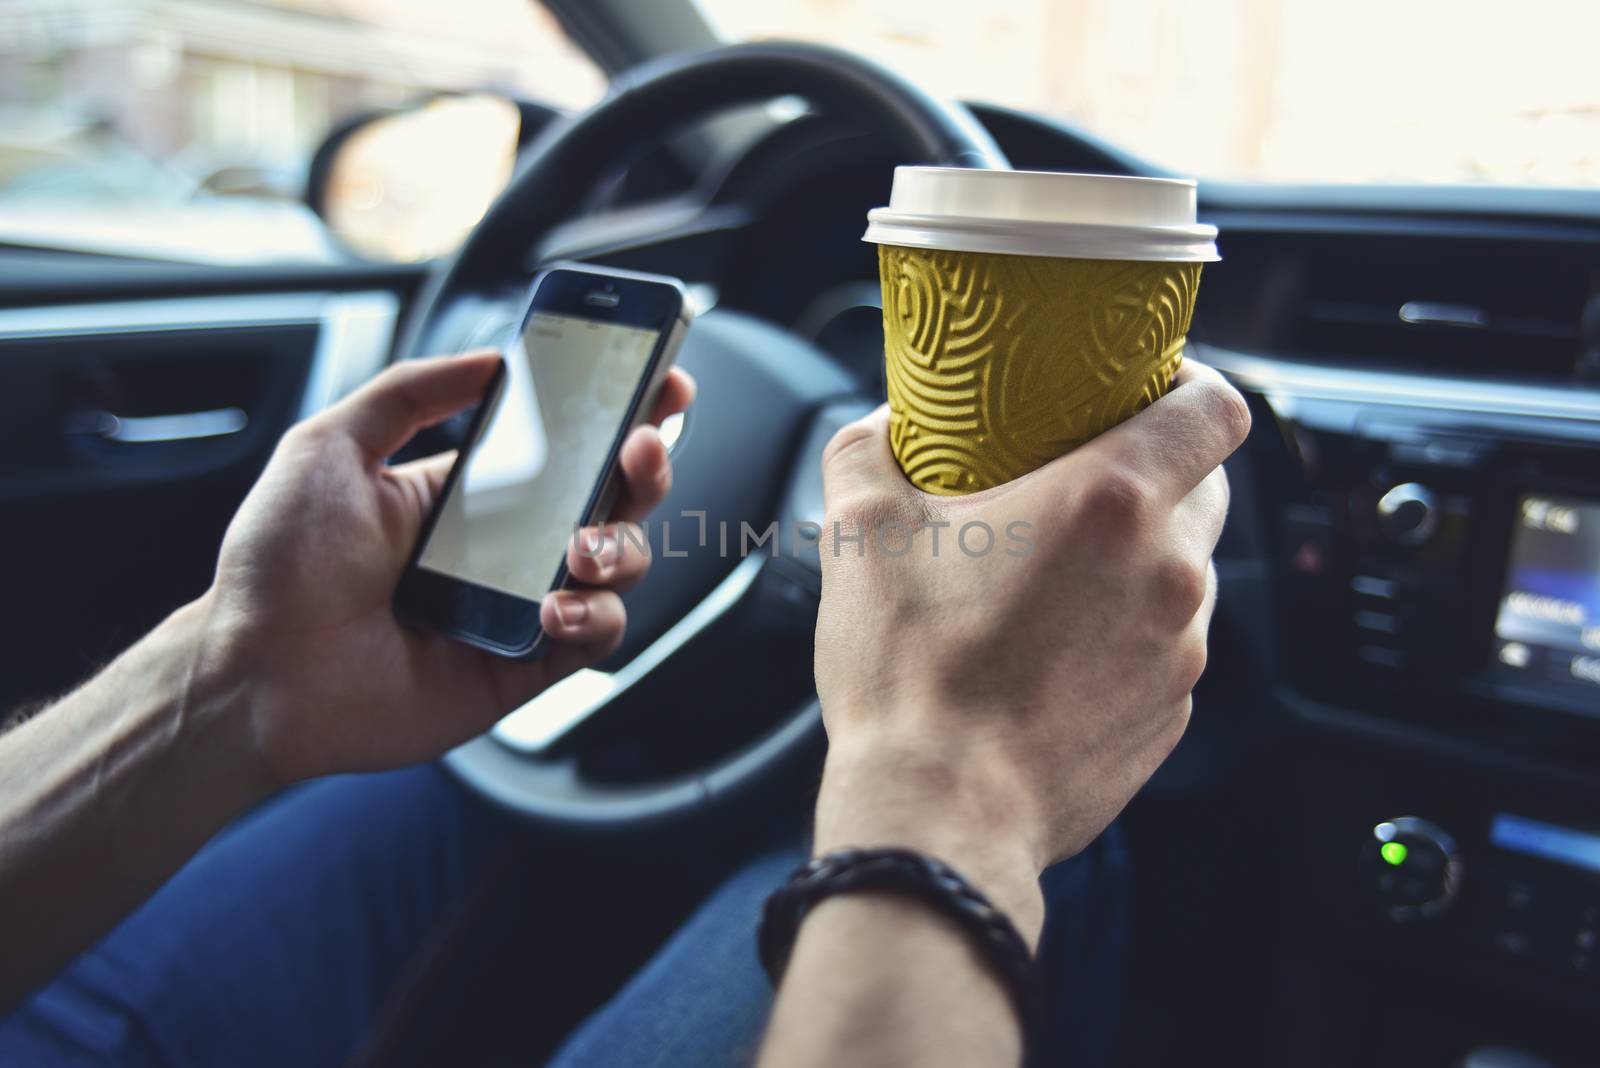 Man arms hold a coffee and phone in automobile